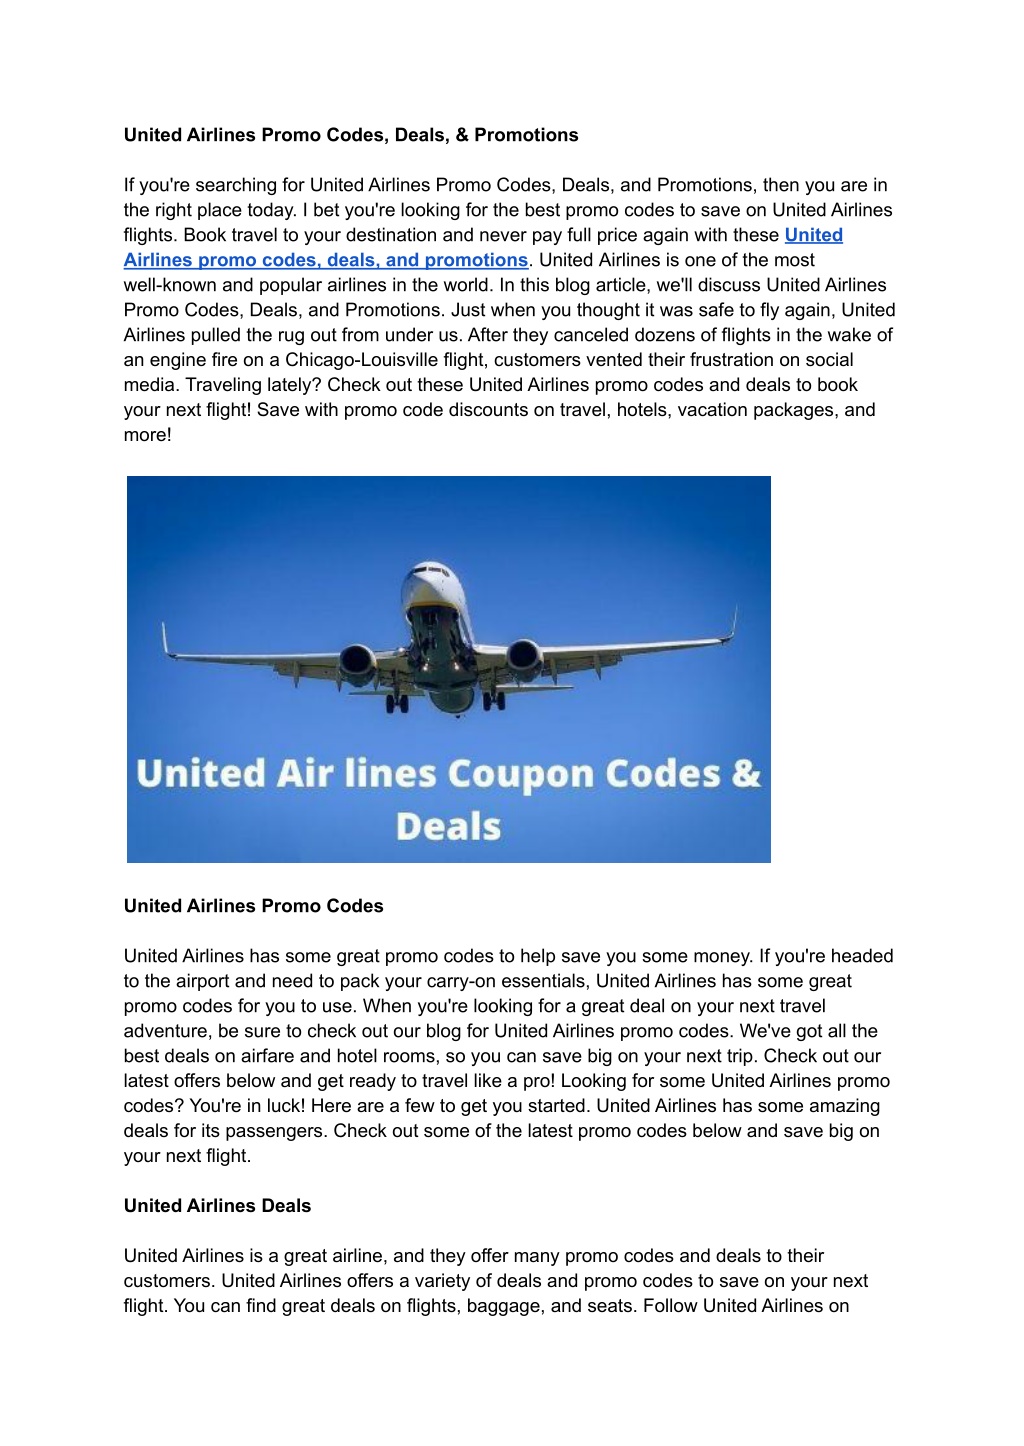 PPT United Airlines Promo Codes, Deals, & Promotions PowerPoint